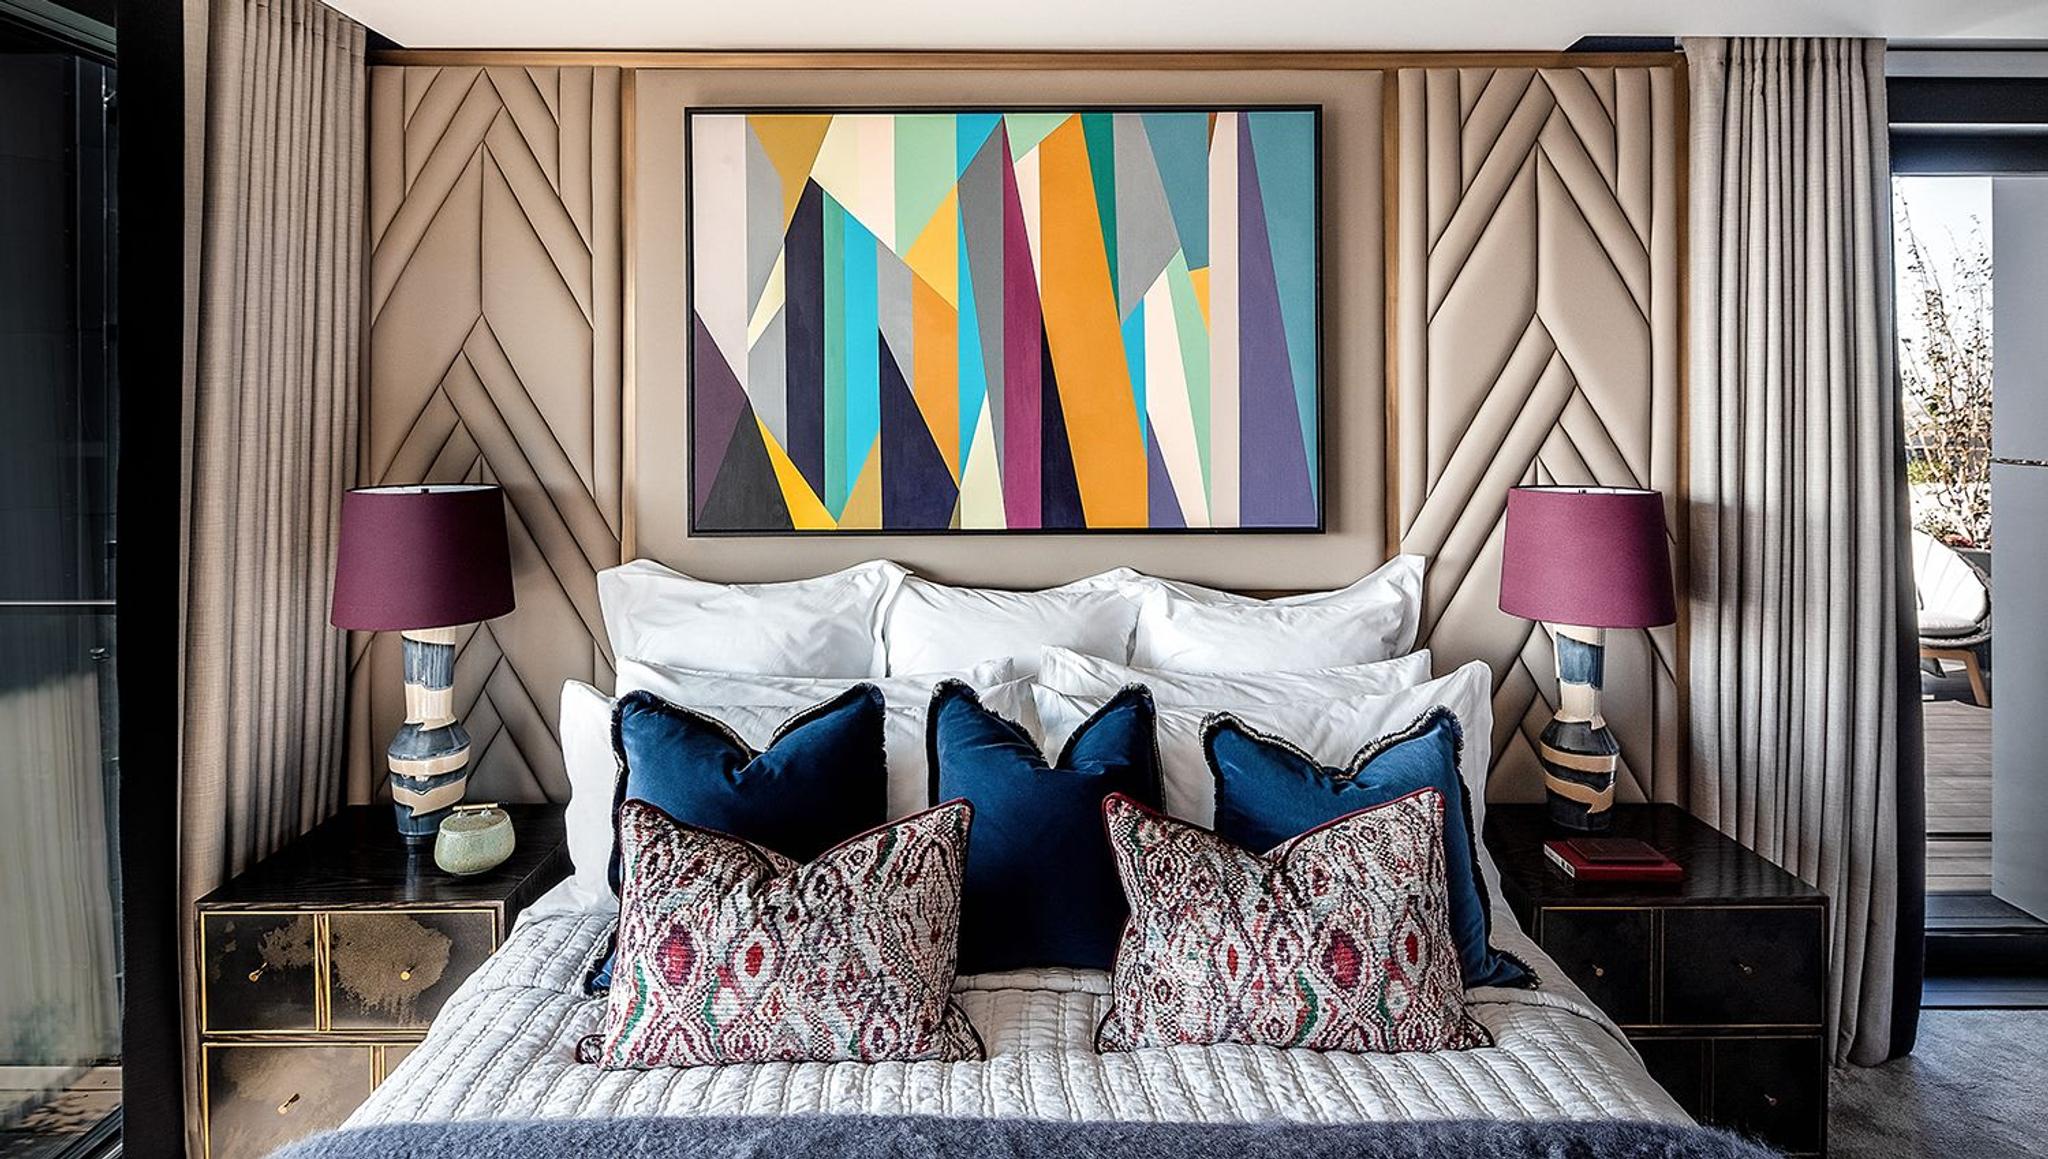 The Dumont, Blue Bedroom: colours, textures and patterns thrive in the guest bedroom